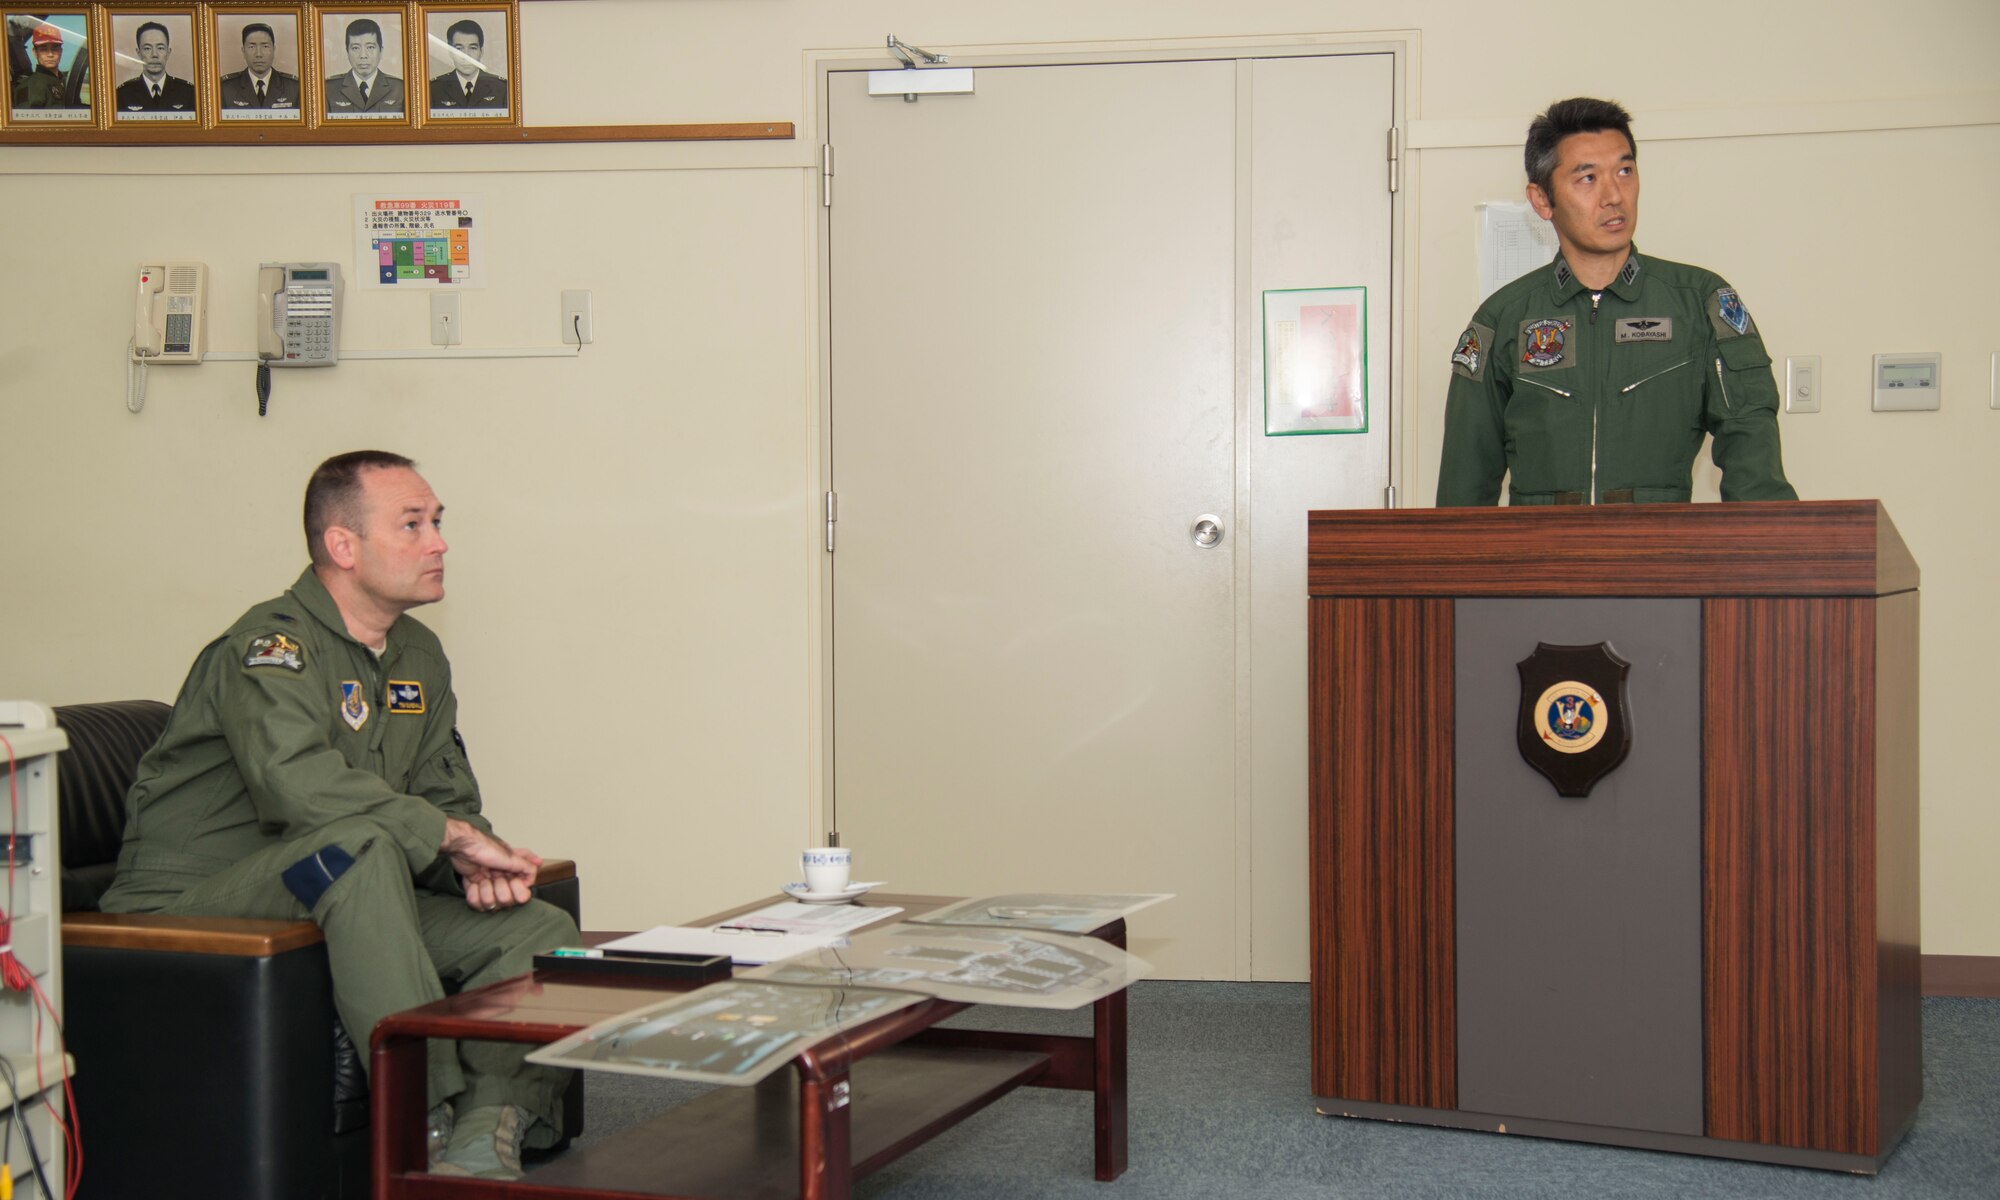 U.S. Air Force Col. Timothy Sundvall (left), the commander of the 35th Fighter Wing, receives a mission brief given by Japan Air Self-Defense Force Lt. Col. Mikio Kobayashi, the commander of the 3rd Fighter Squadron, at Misawa Air Base, Japan, June 22, 2016. The brief was tailored to give Sundvall information about the differences between the F-2A and the F-16 Fighting Falcon, so he could properly operate and understand the aircraft once in the air. (U.S. Air Force photo by Senior Airman Brittany A. Chase)